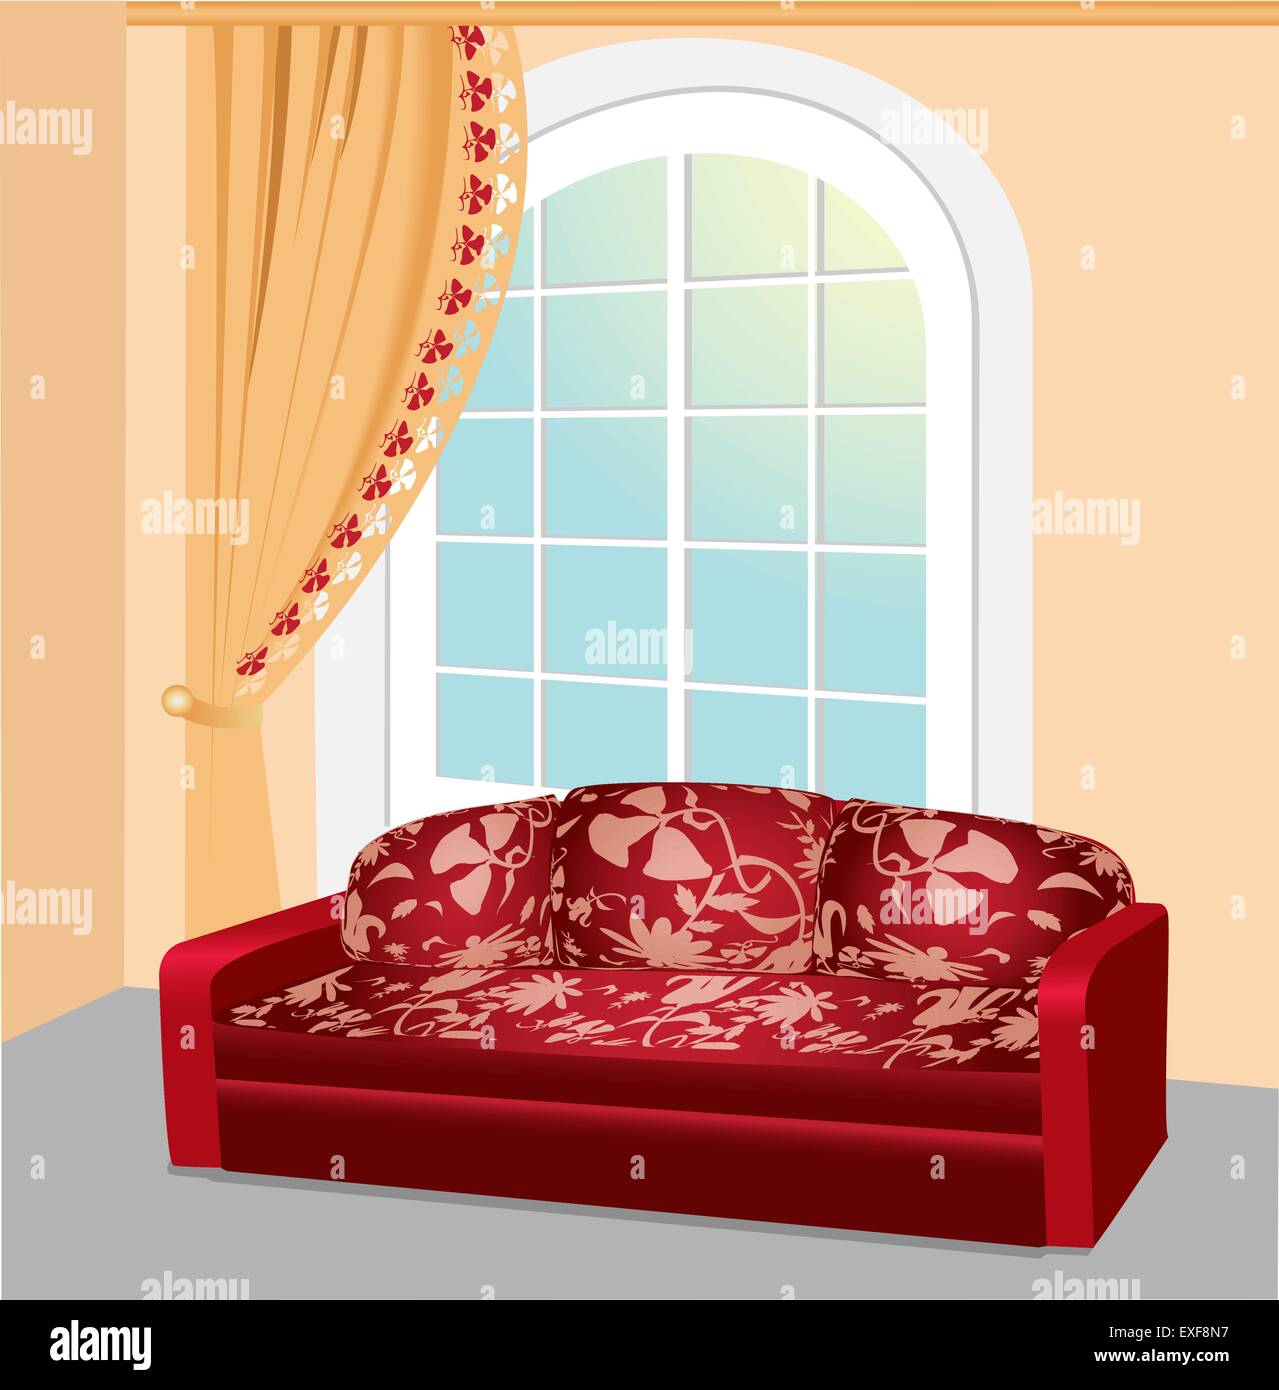 Red sofa near the window with lace curtain Stock Vector